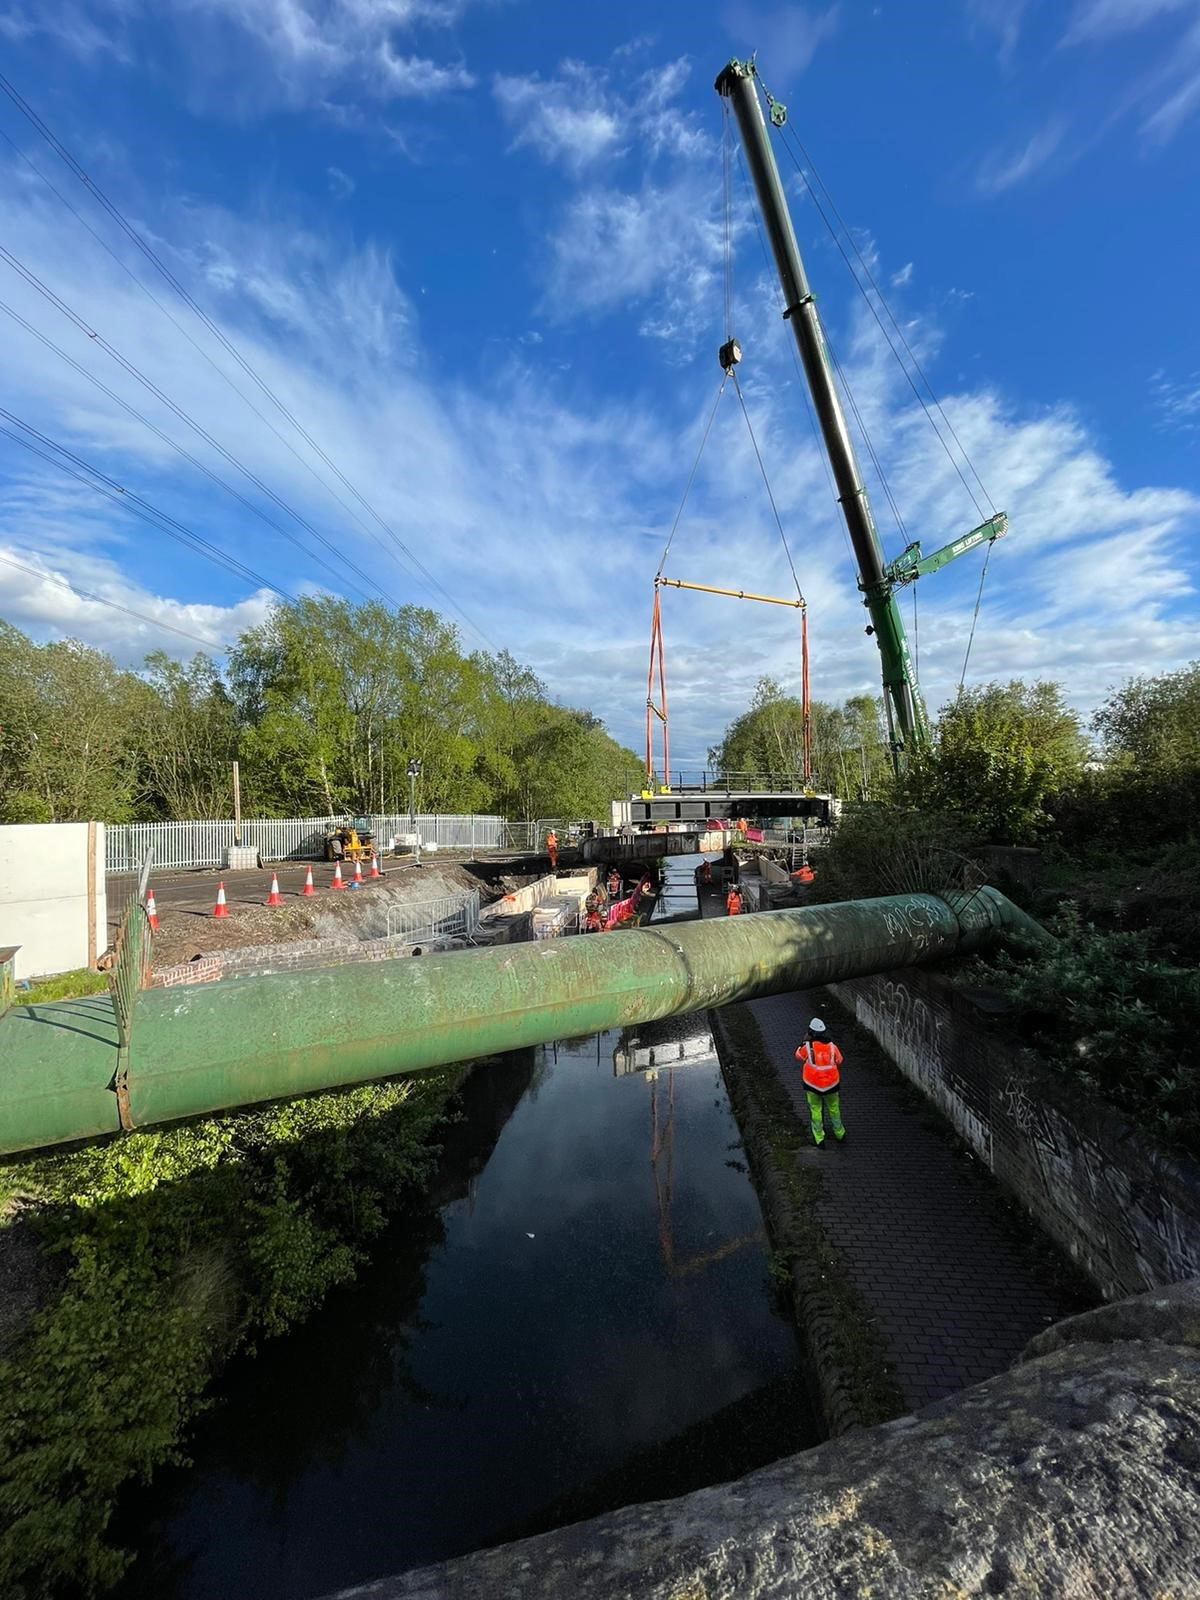 New Bridge Installed for Wednesbury to Brierley Hill Metro Extension